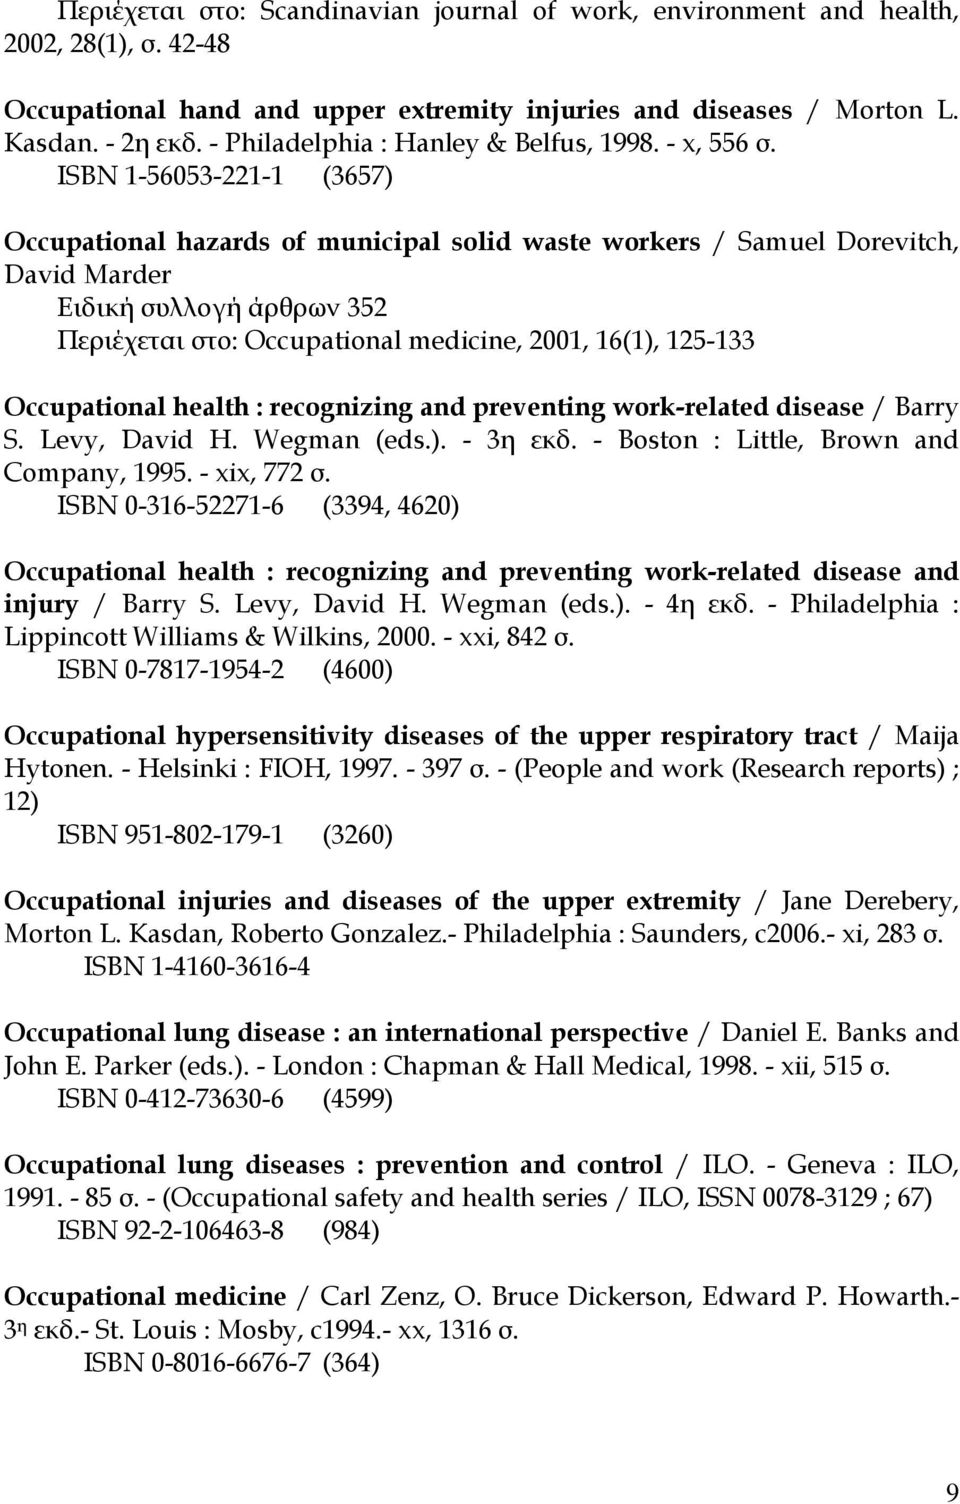 Occupational health : recognizing and preventing work-related disease / Barry S. Levy, David H. Wegman (eds.). - 3η εκδ. - Boston : Little, Brown and Company, 1995. - xix, 772 σ.